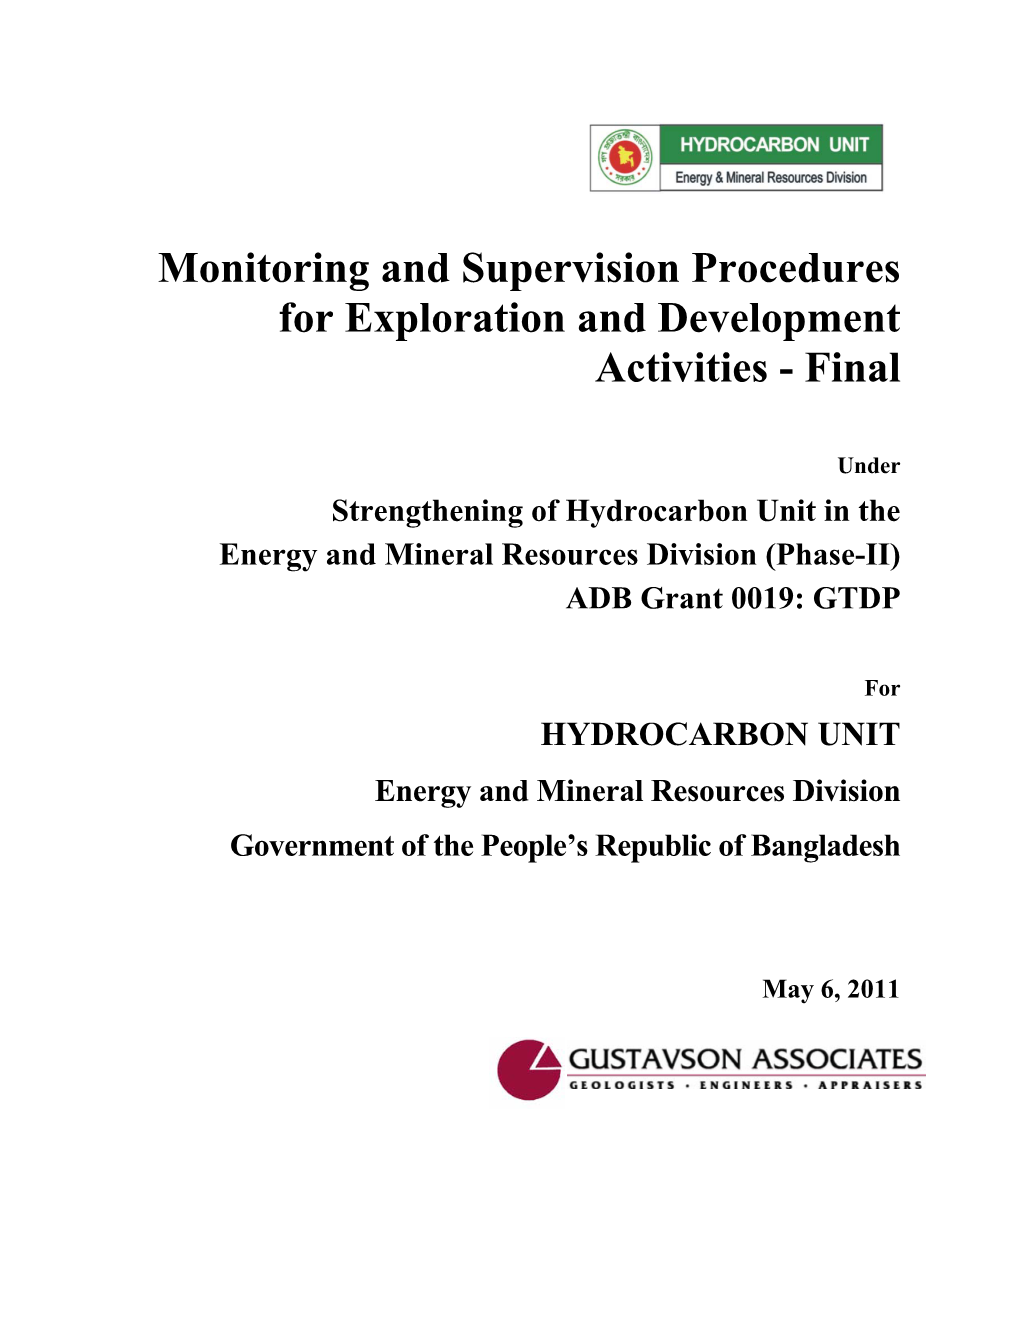 Monitoring and Supervision Procedures for Exploration and Development Activities - Final